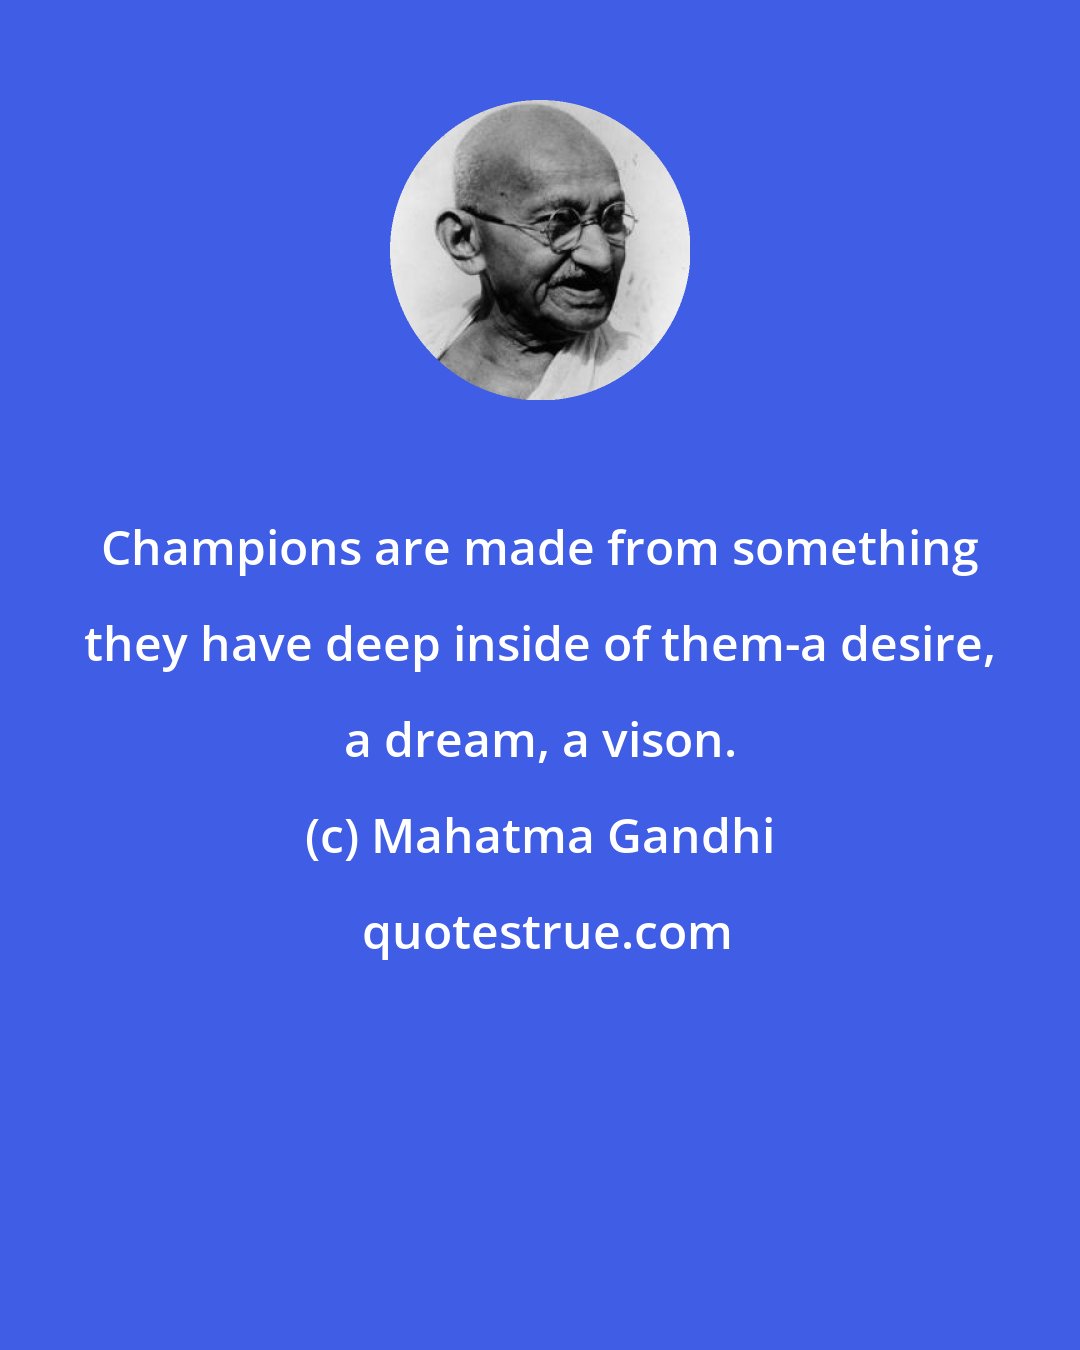 Mahatma Gandhi: Champions are made from something they have deep inside of them-a desire, a dream, a vison.